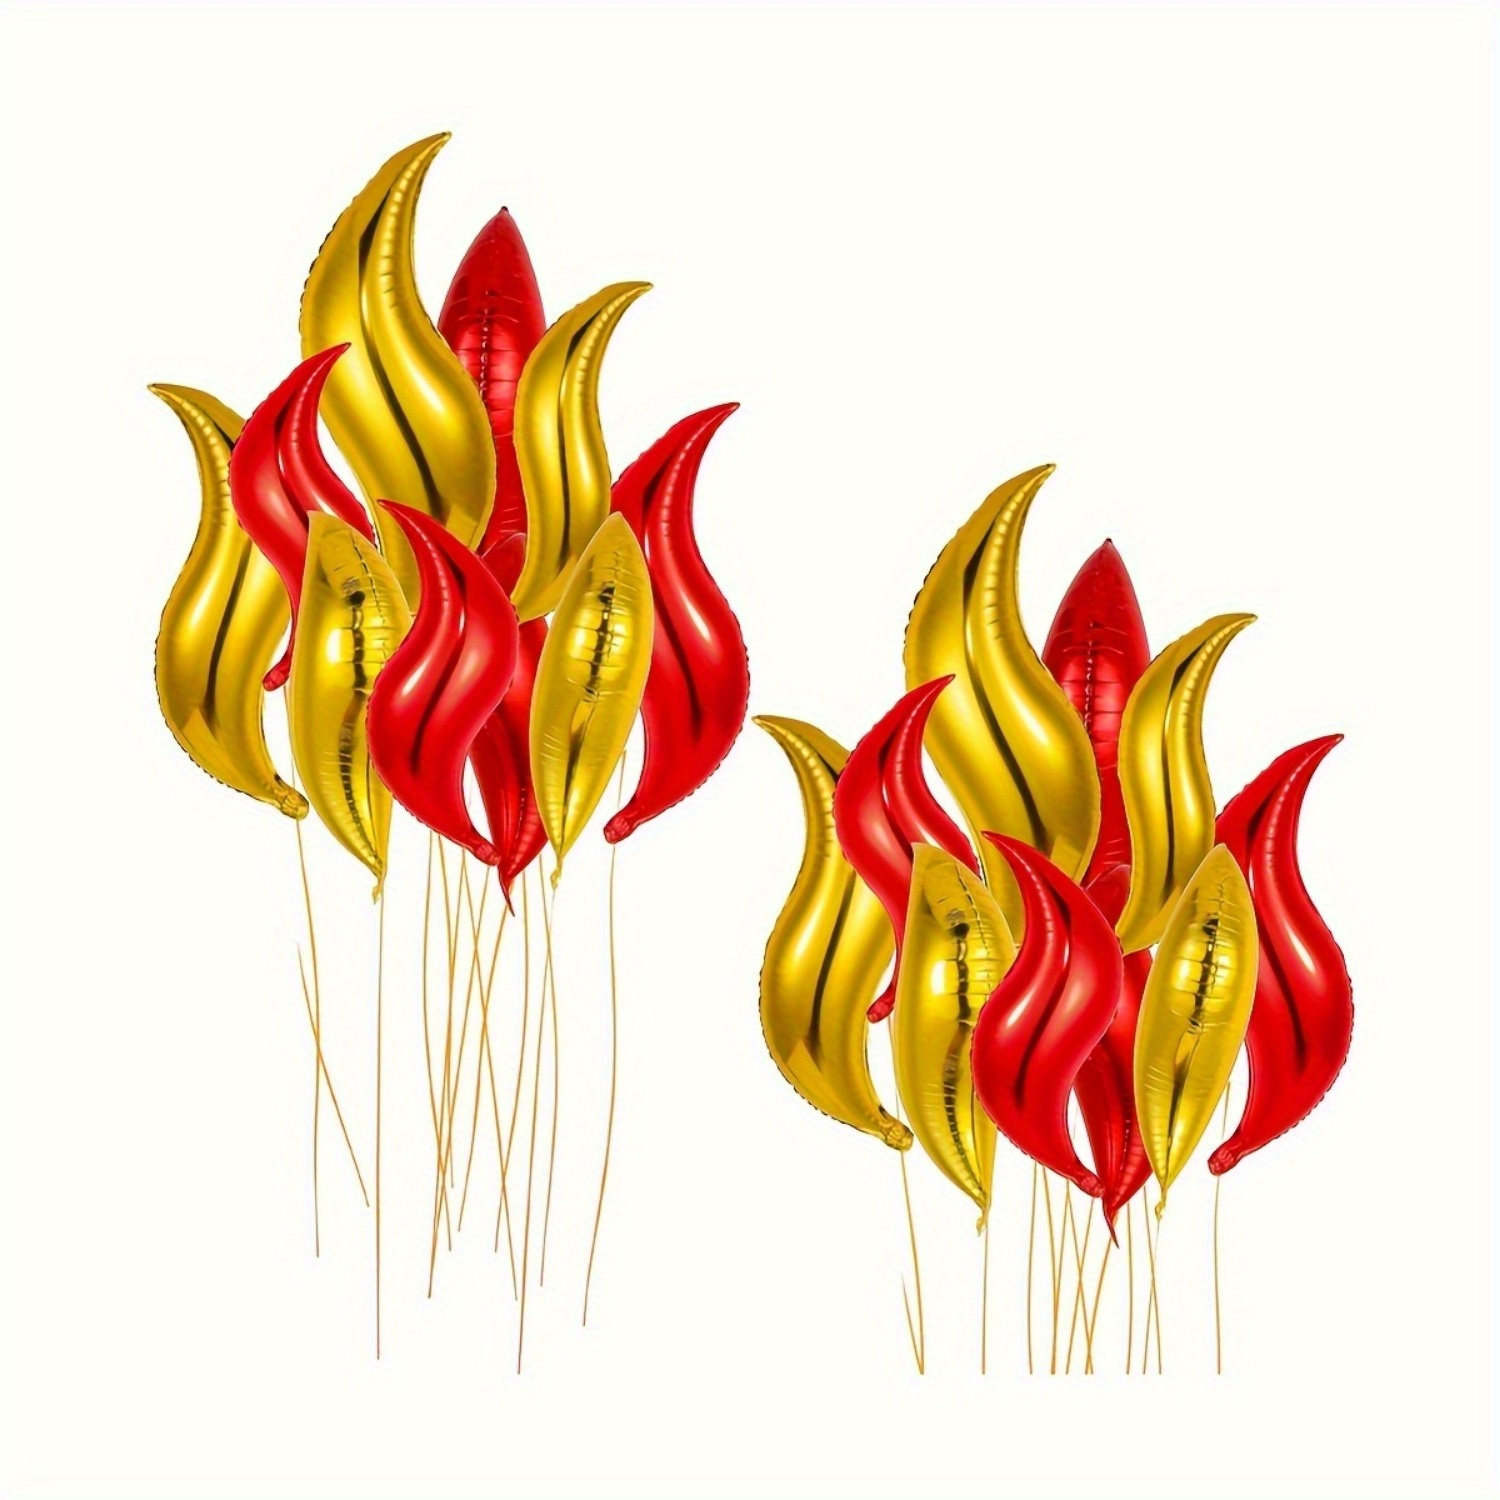 

20pcs, Golden Red Flame Shaped Foil Balloons, Firefighter Theme Party Decor, Birthday Party Decor, Holiday Decor, Carnival Decor, Home Room Decor